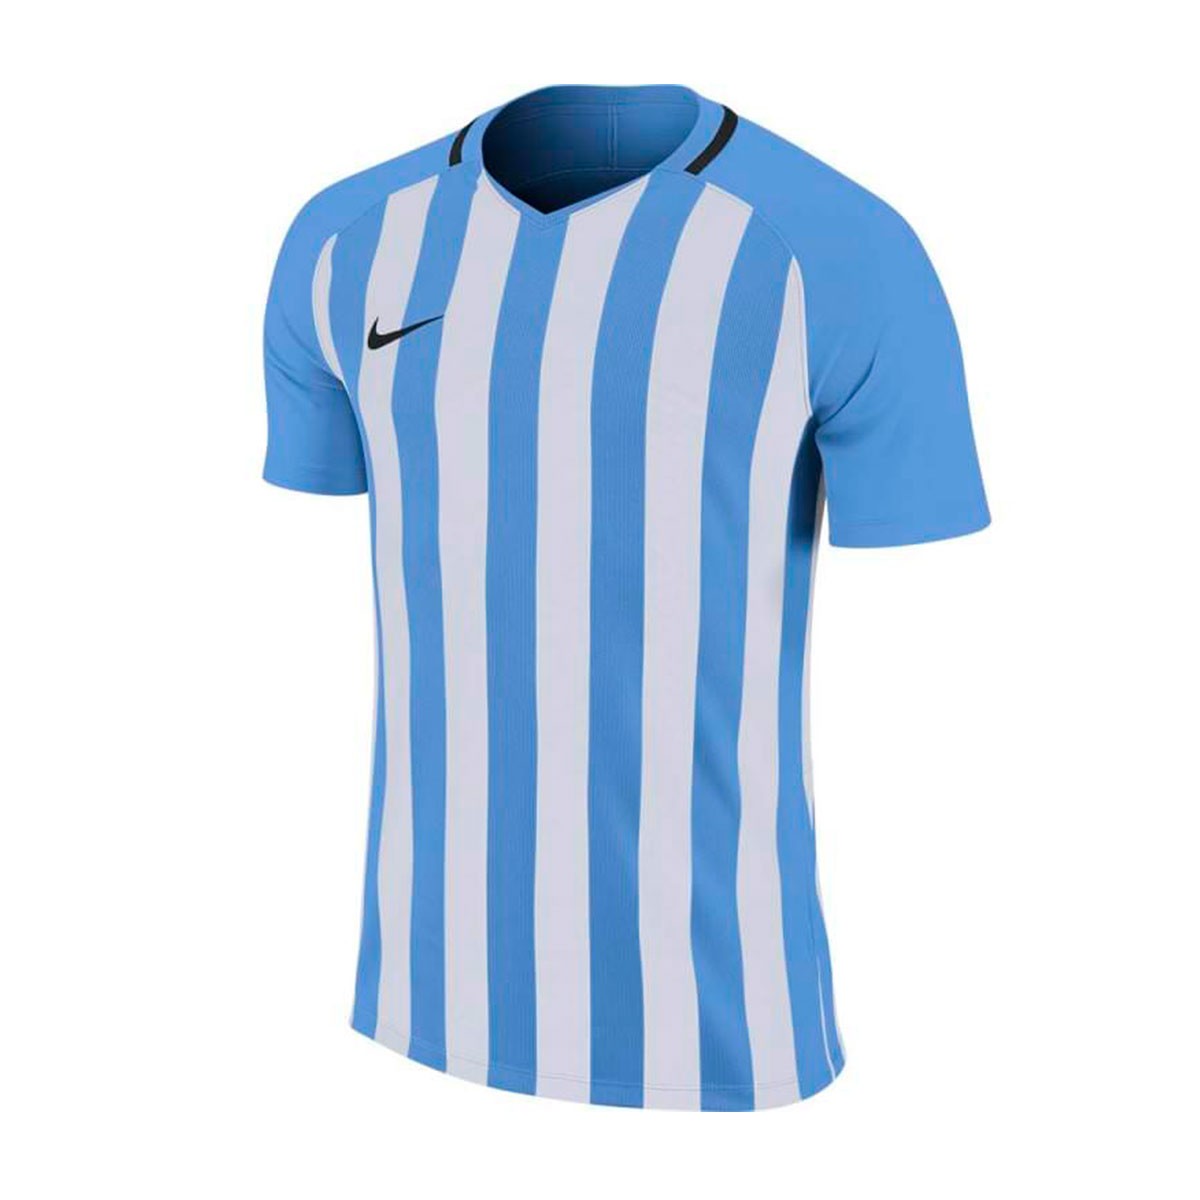 blue and white jersey shirt